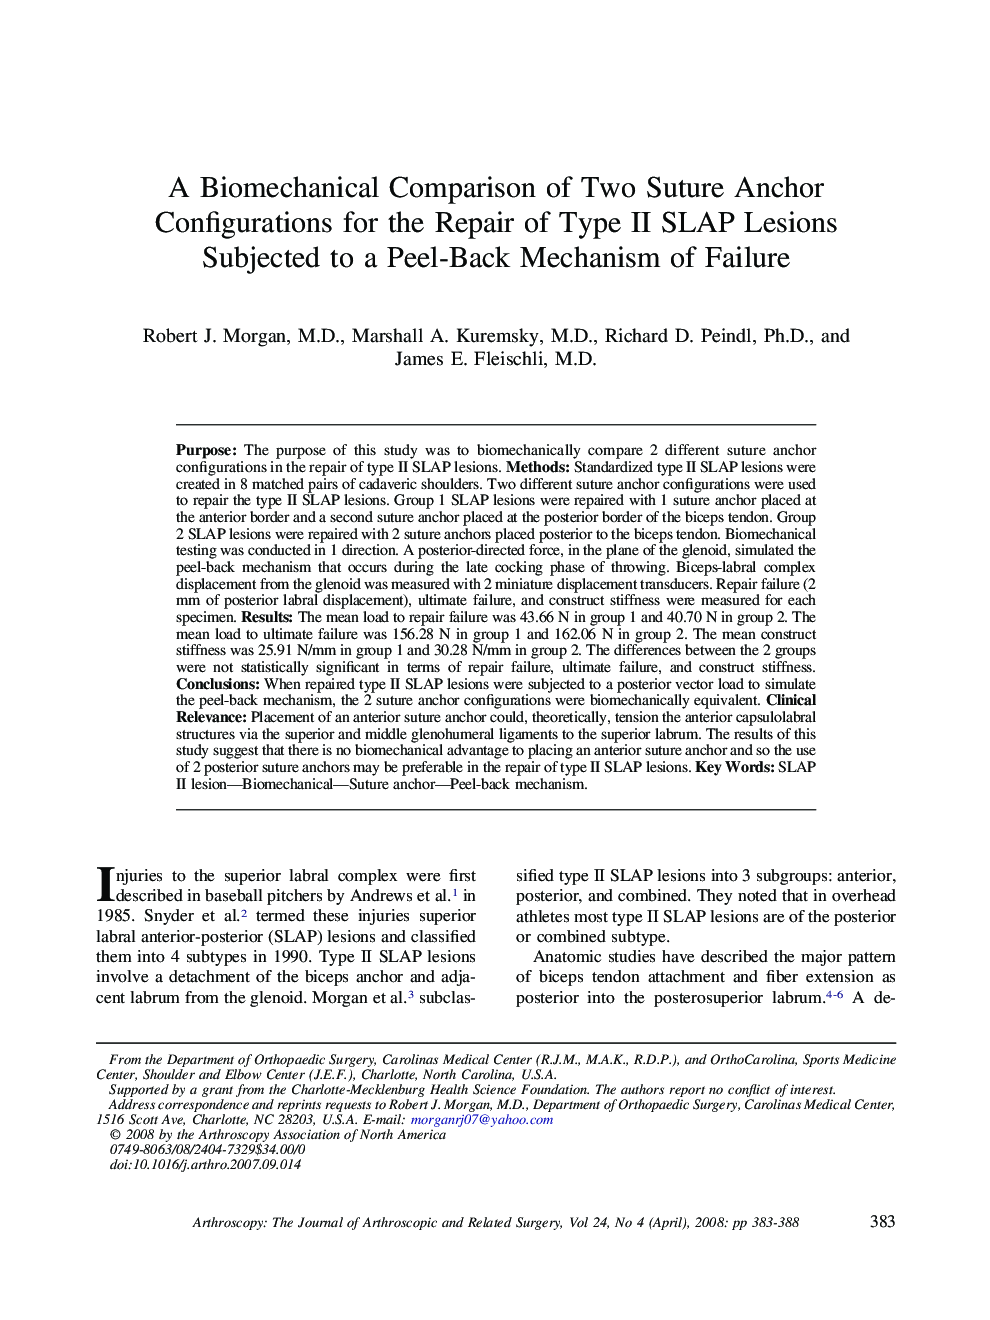 A Biomechanical Comparison of Two Suture Anchor Configurations for the Repair of Type II SLAP Lesions Subjected to a Peel-Back Mechanism of Failure 